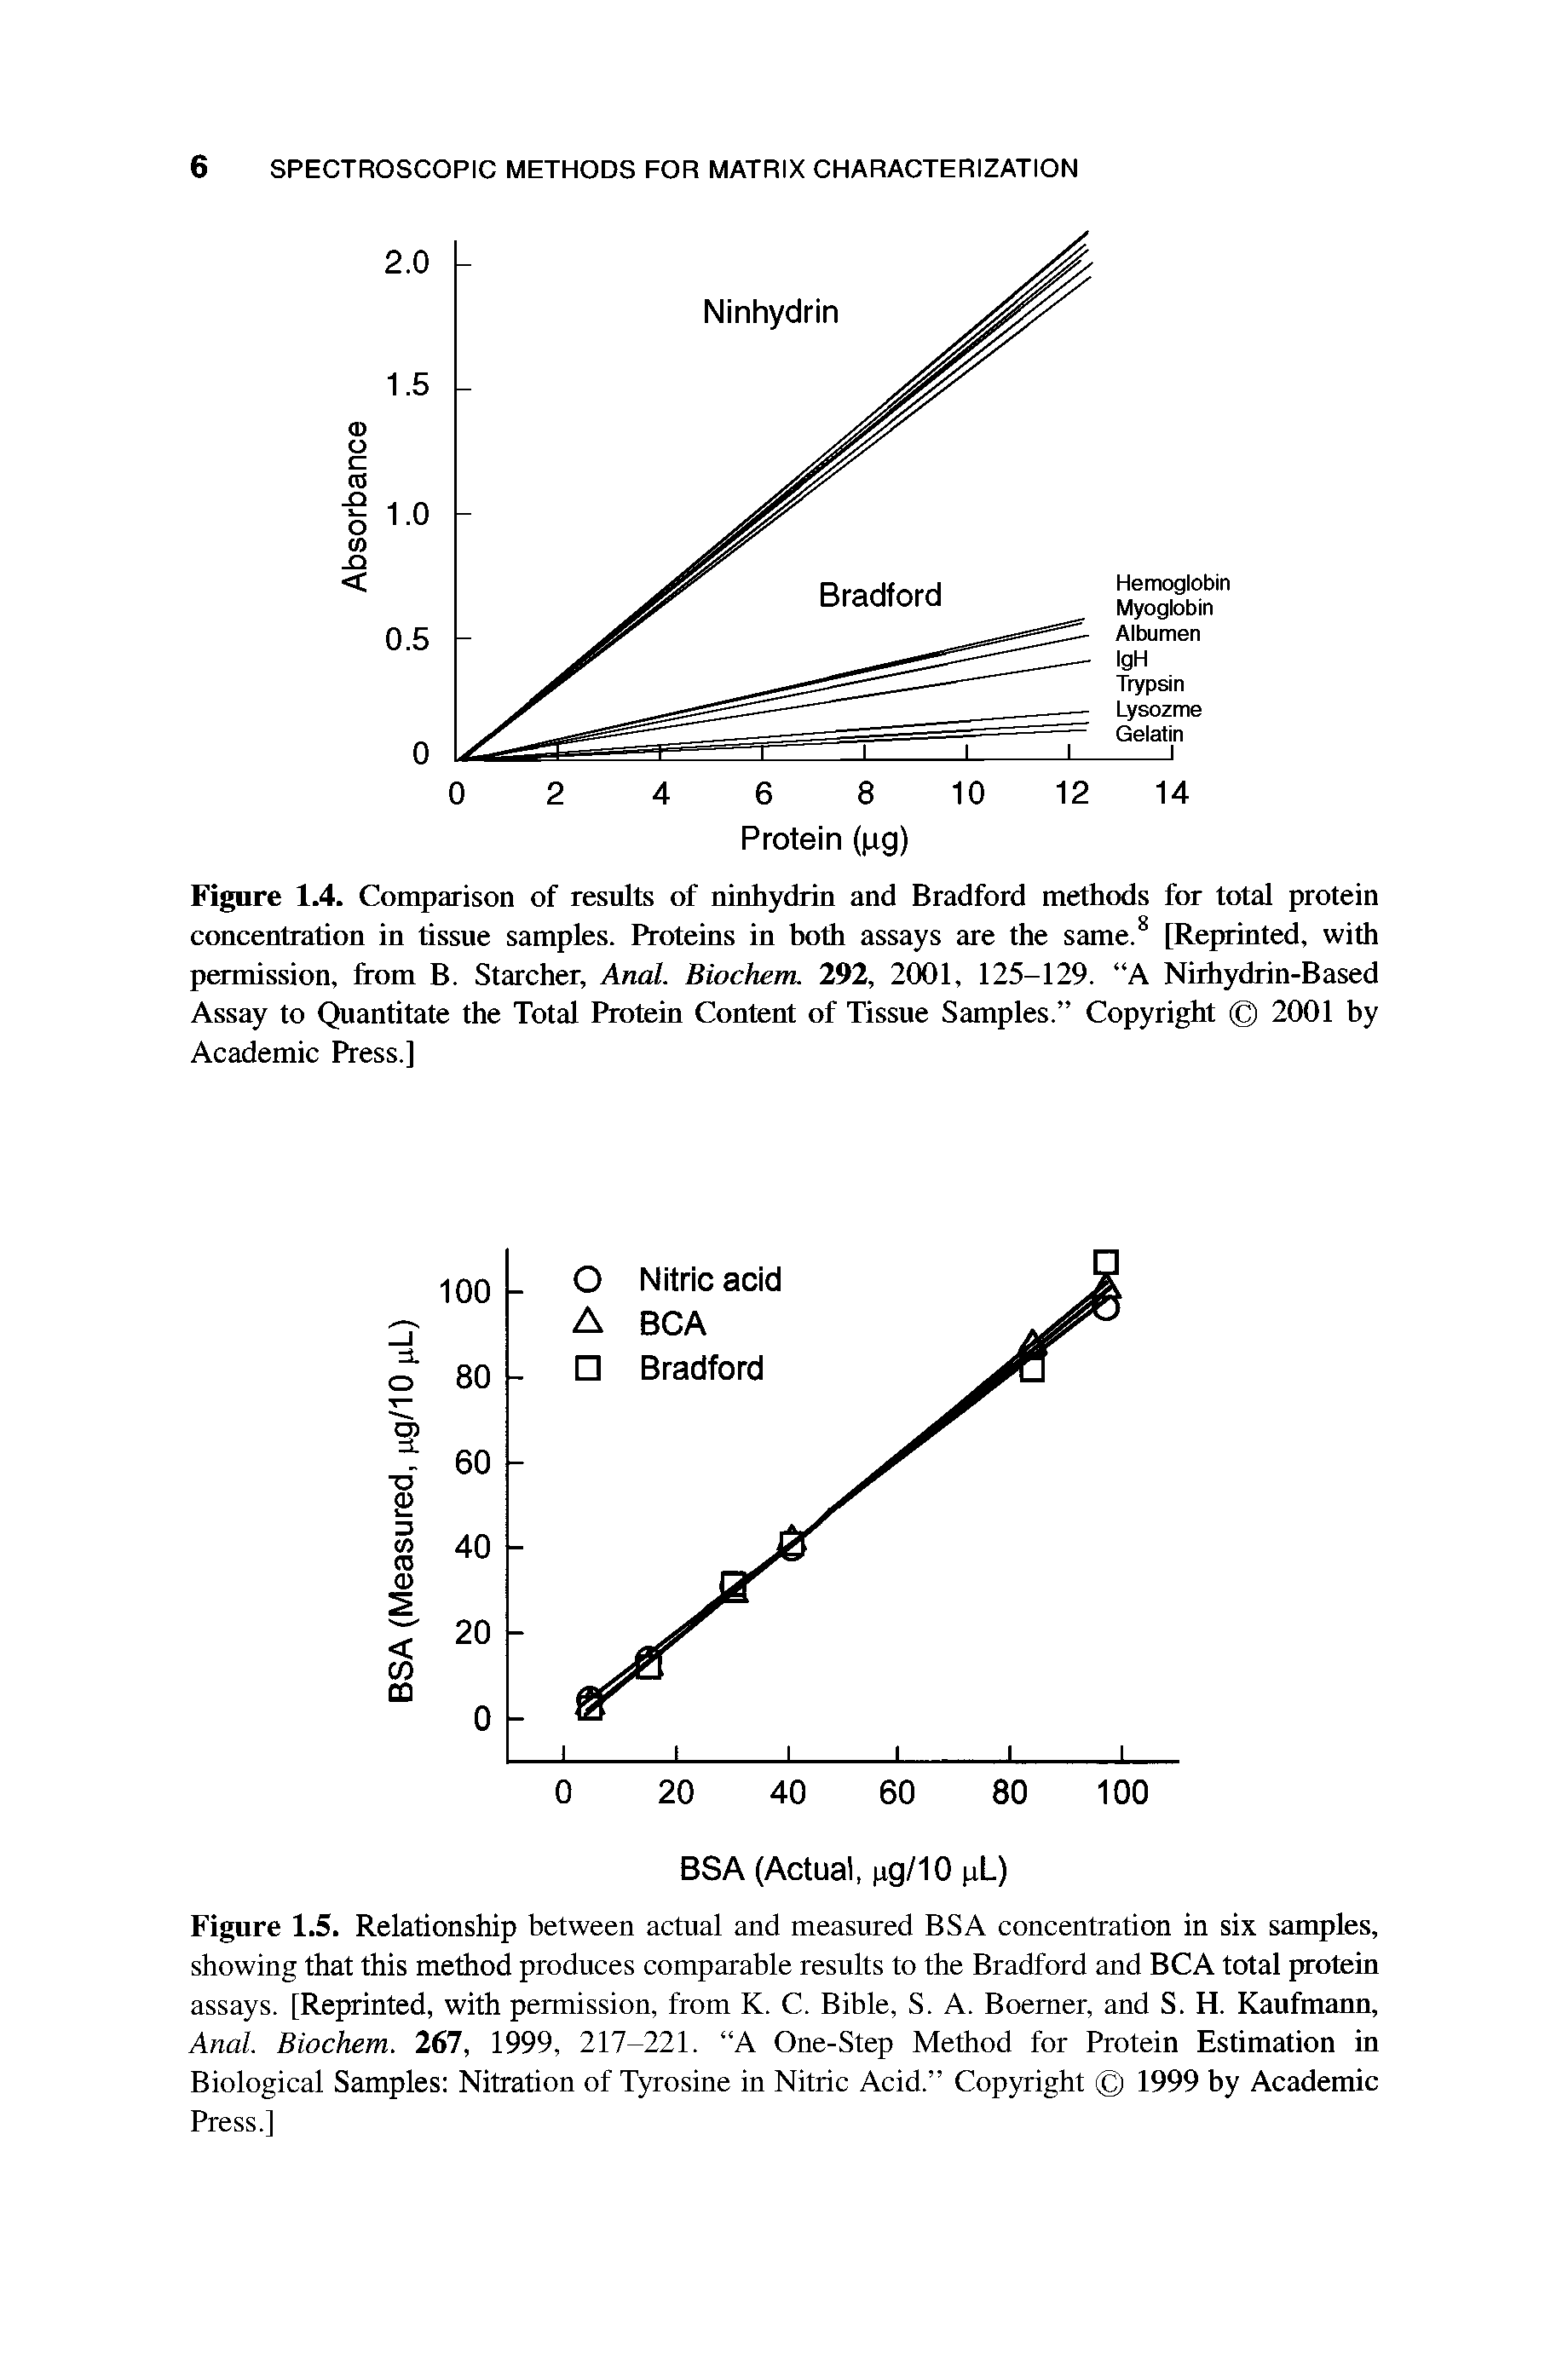 Figure 1.4. Comparison of results of ninhydrin and Bradford methods for total protein concentration in tissue samples. Proteins in both assays are the same.8 [Reprinted, with permission, from B. Starcher, Anal. Hiochem. 292, 2001, 125-129. A Nirhydrin-Based Assay to Quantitate the Total Protein Content of Tissue Samples. Copyright 2001 by Academic Press.]...